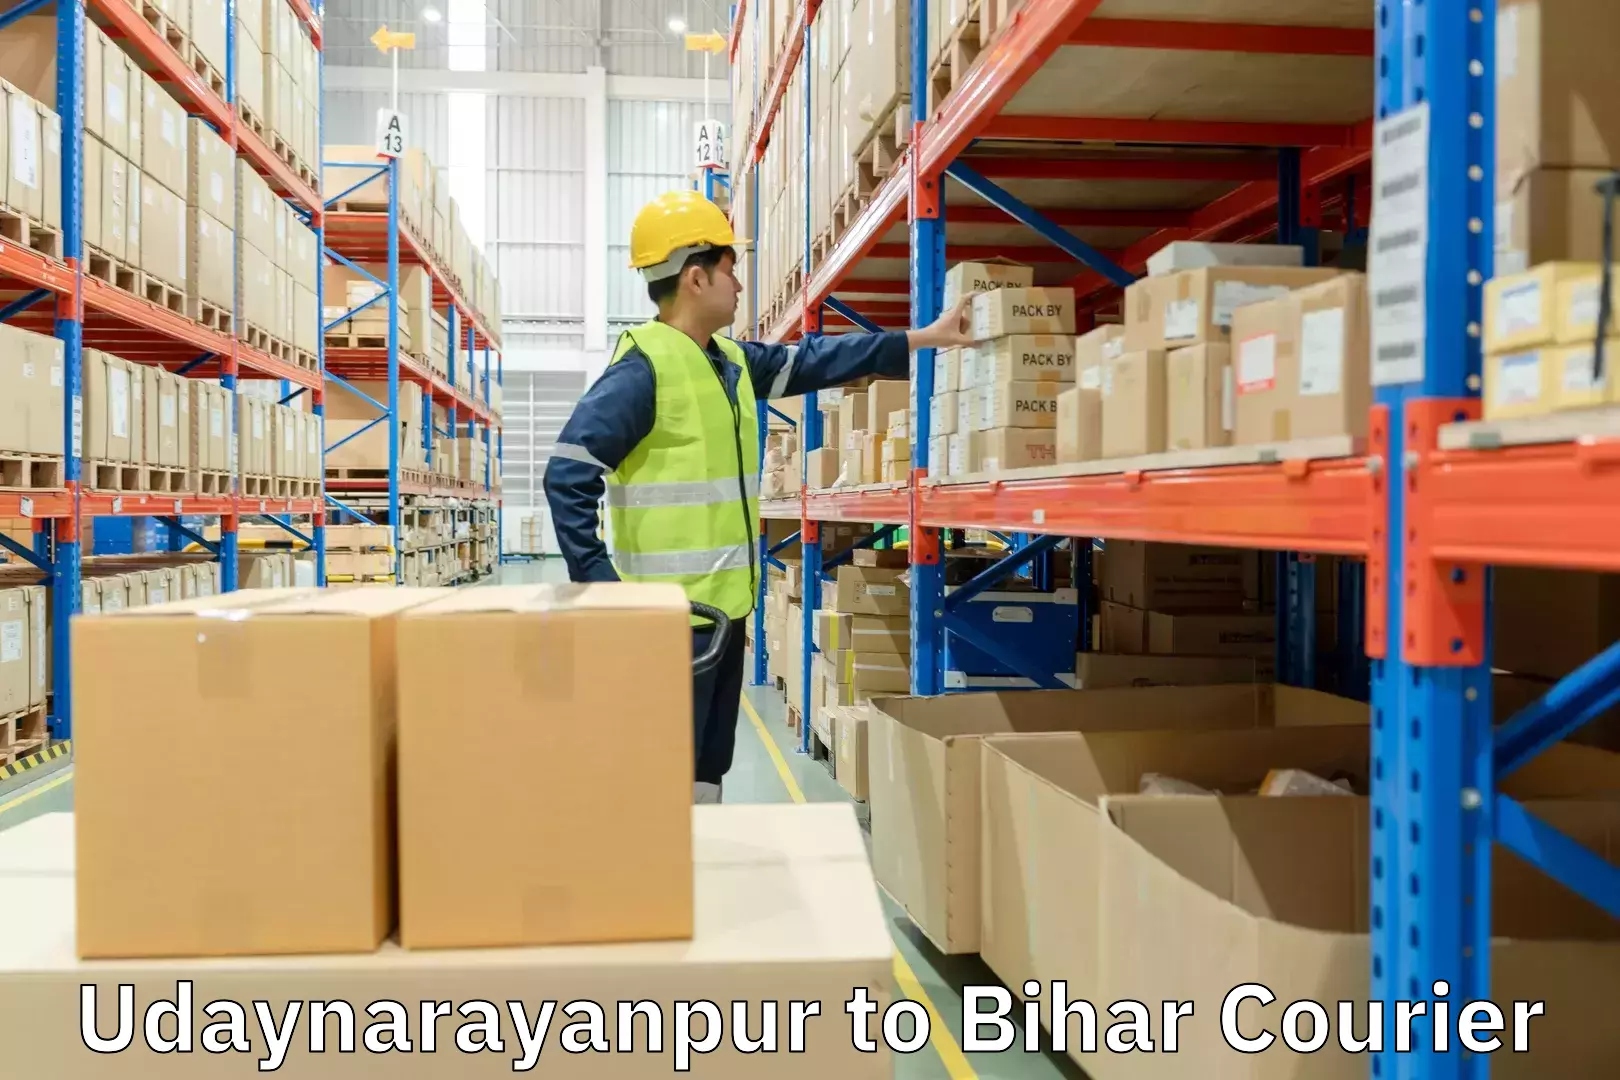 Package consolidation in Udaynarayanpur to Bihar